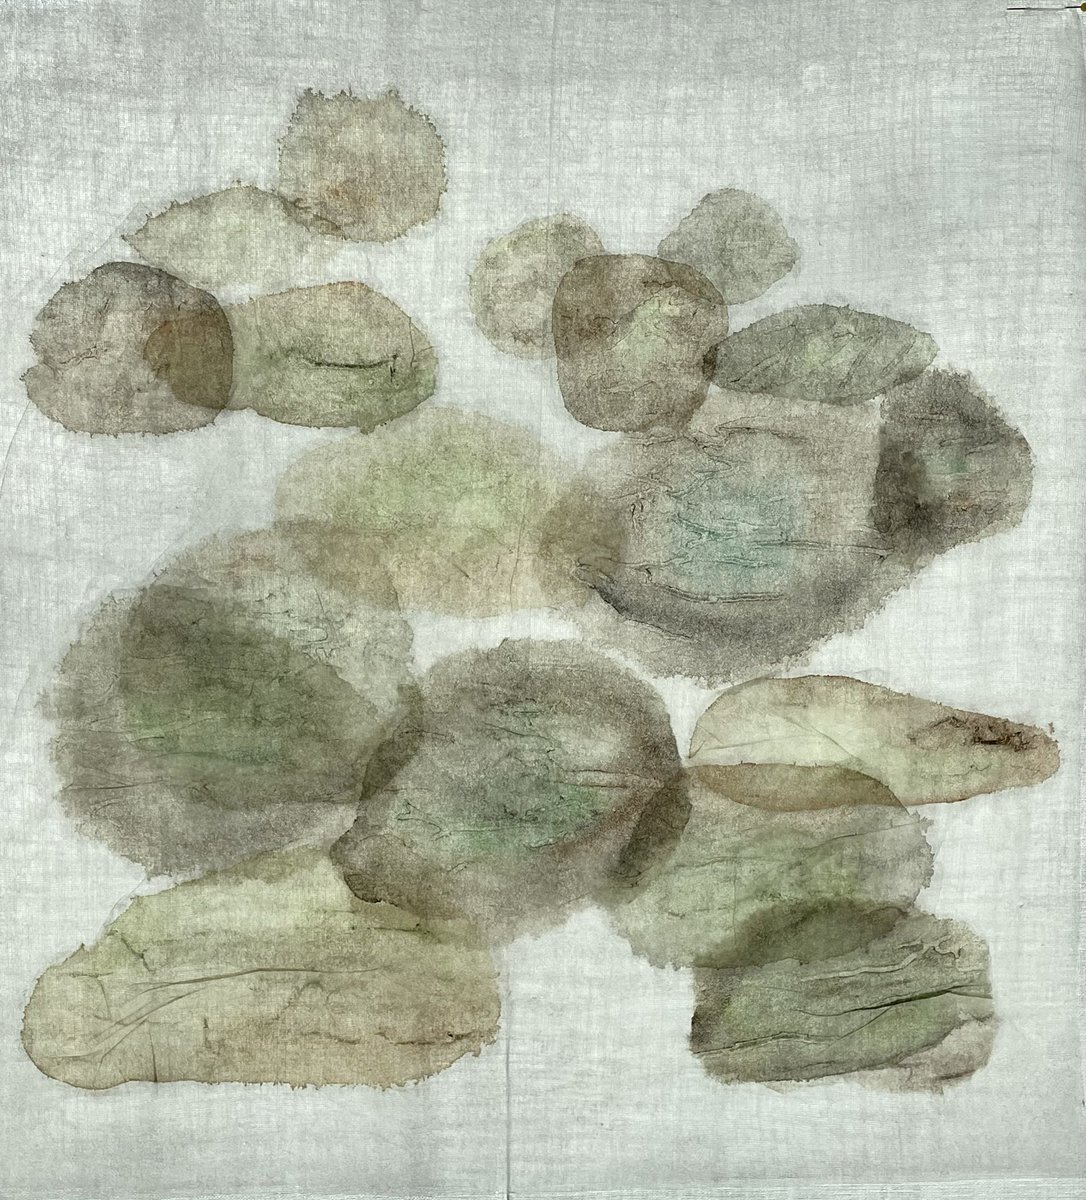 On a white background and two versions lit from behind. #stones #greenperspective #natureinart #water